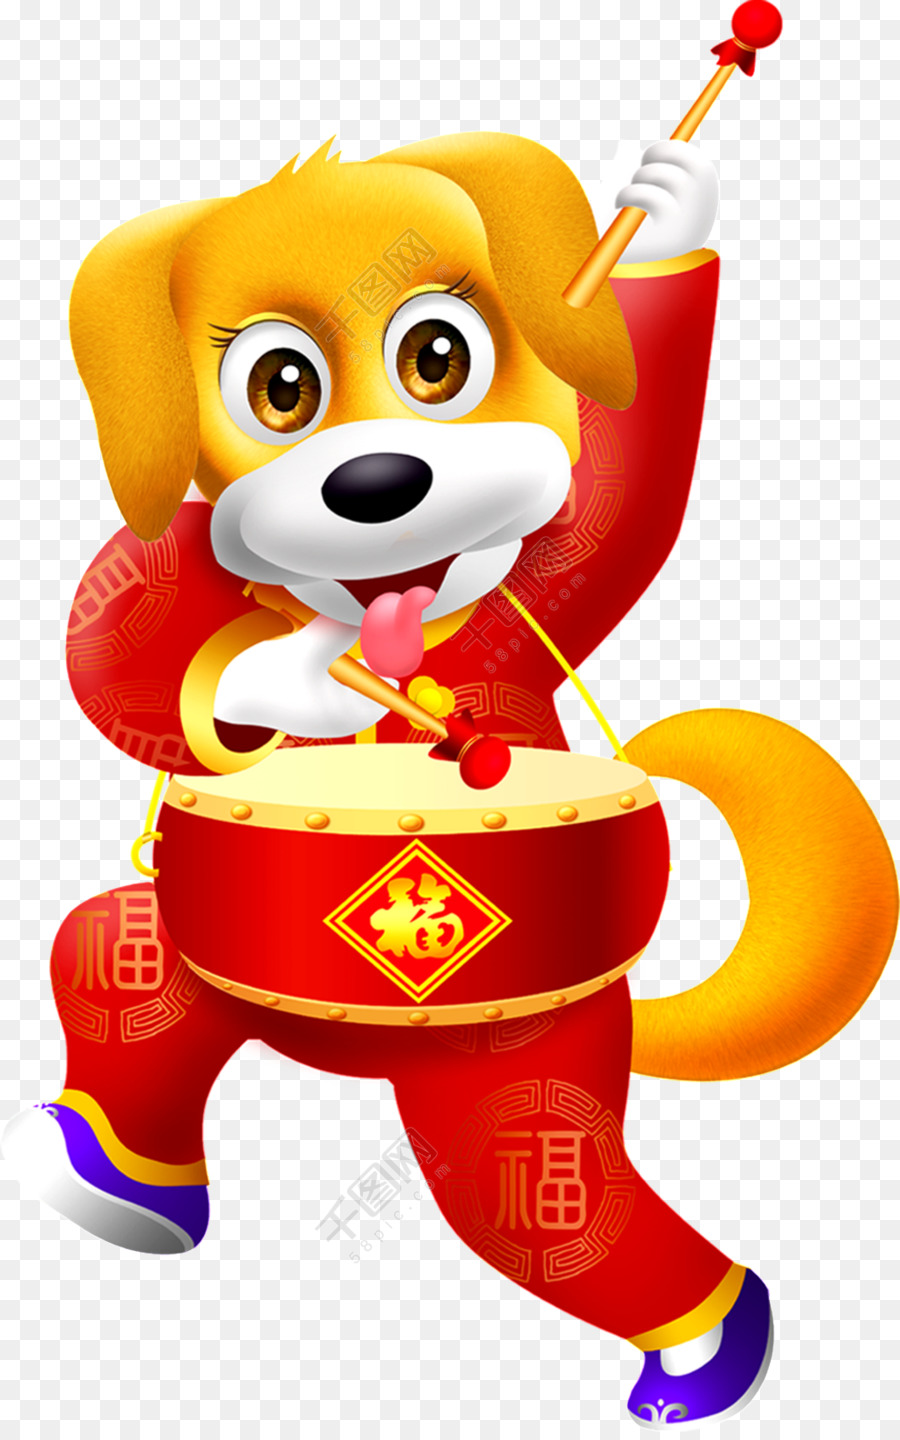 Chinese New Year Character